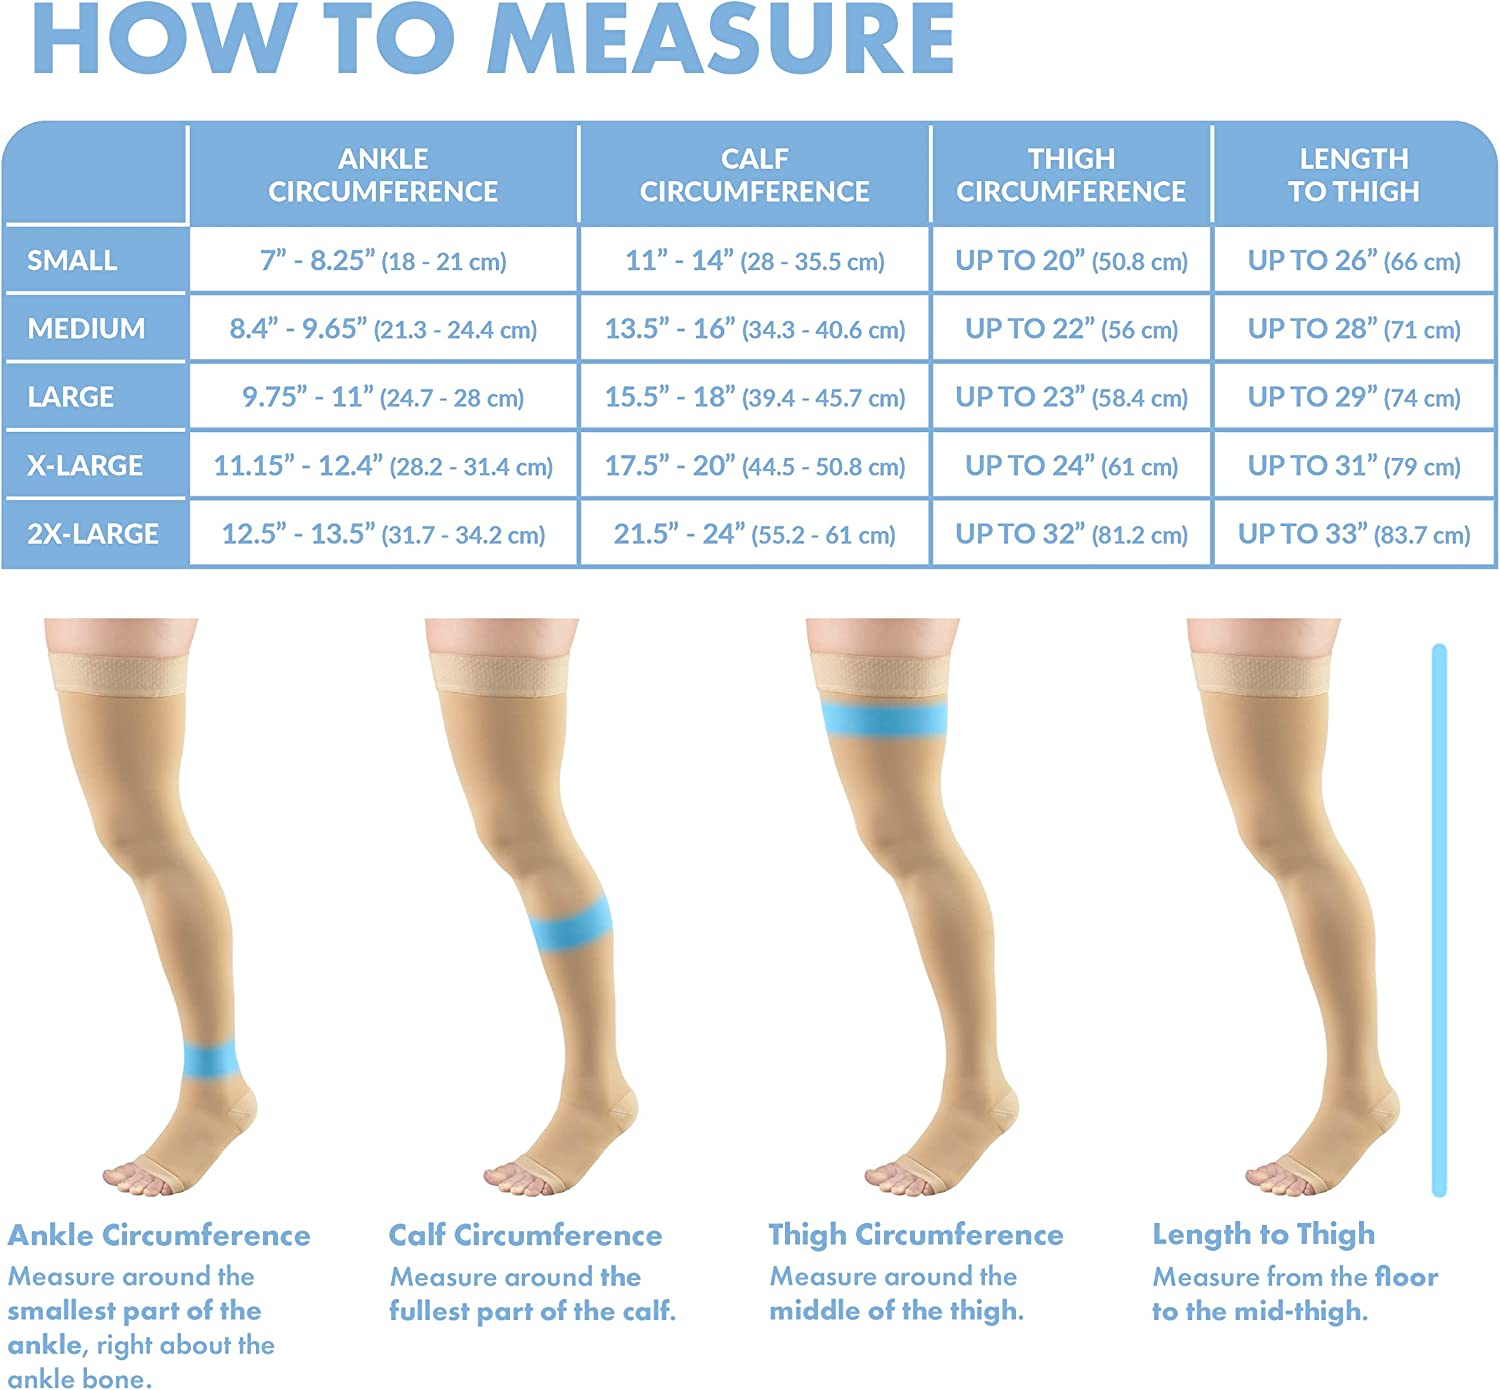 NEW Compression Stockings 20-30 mmHg | Talk of the Villages